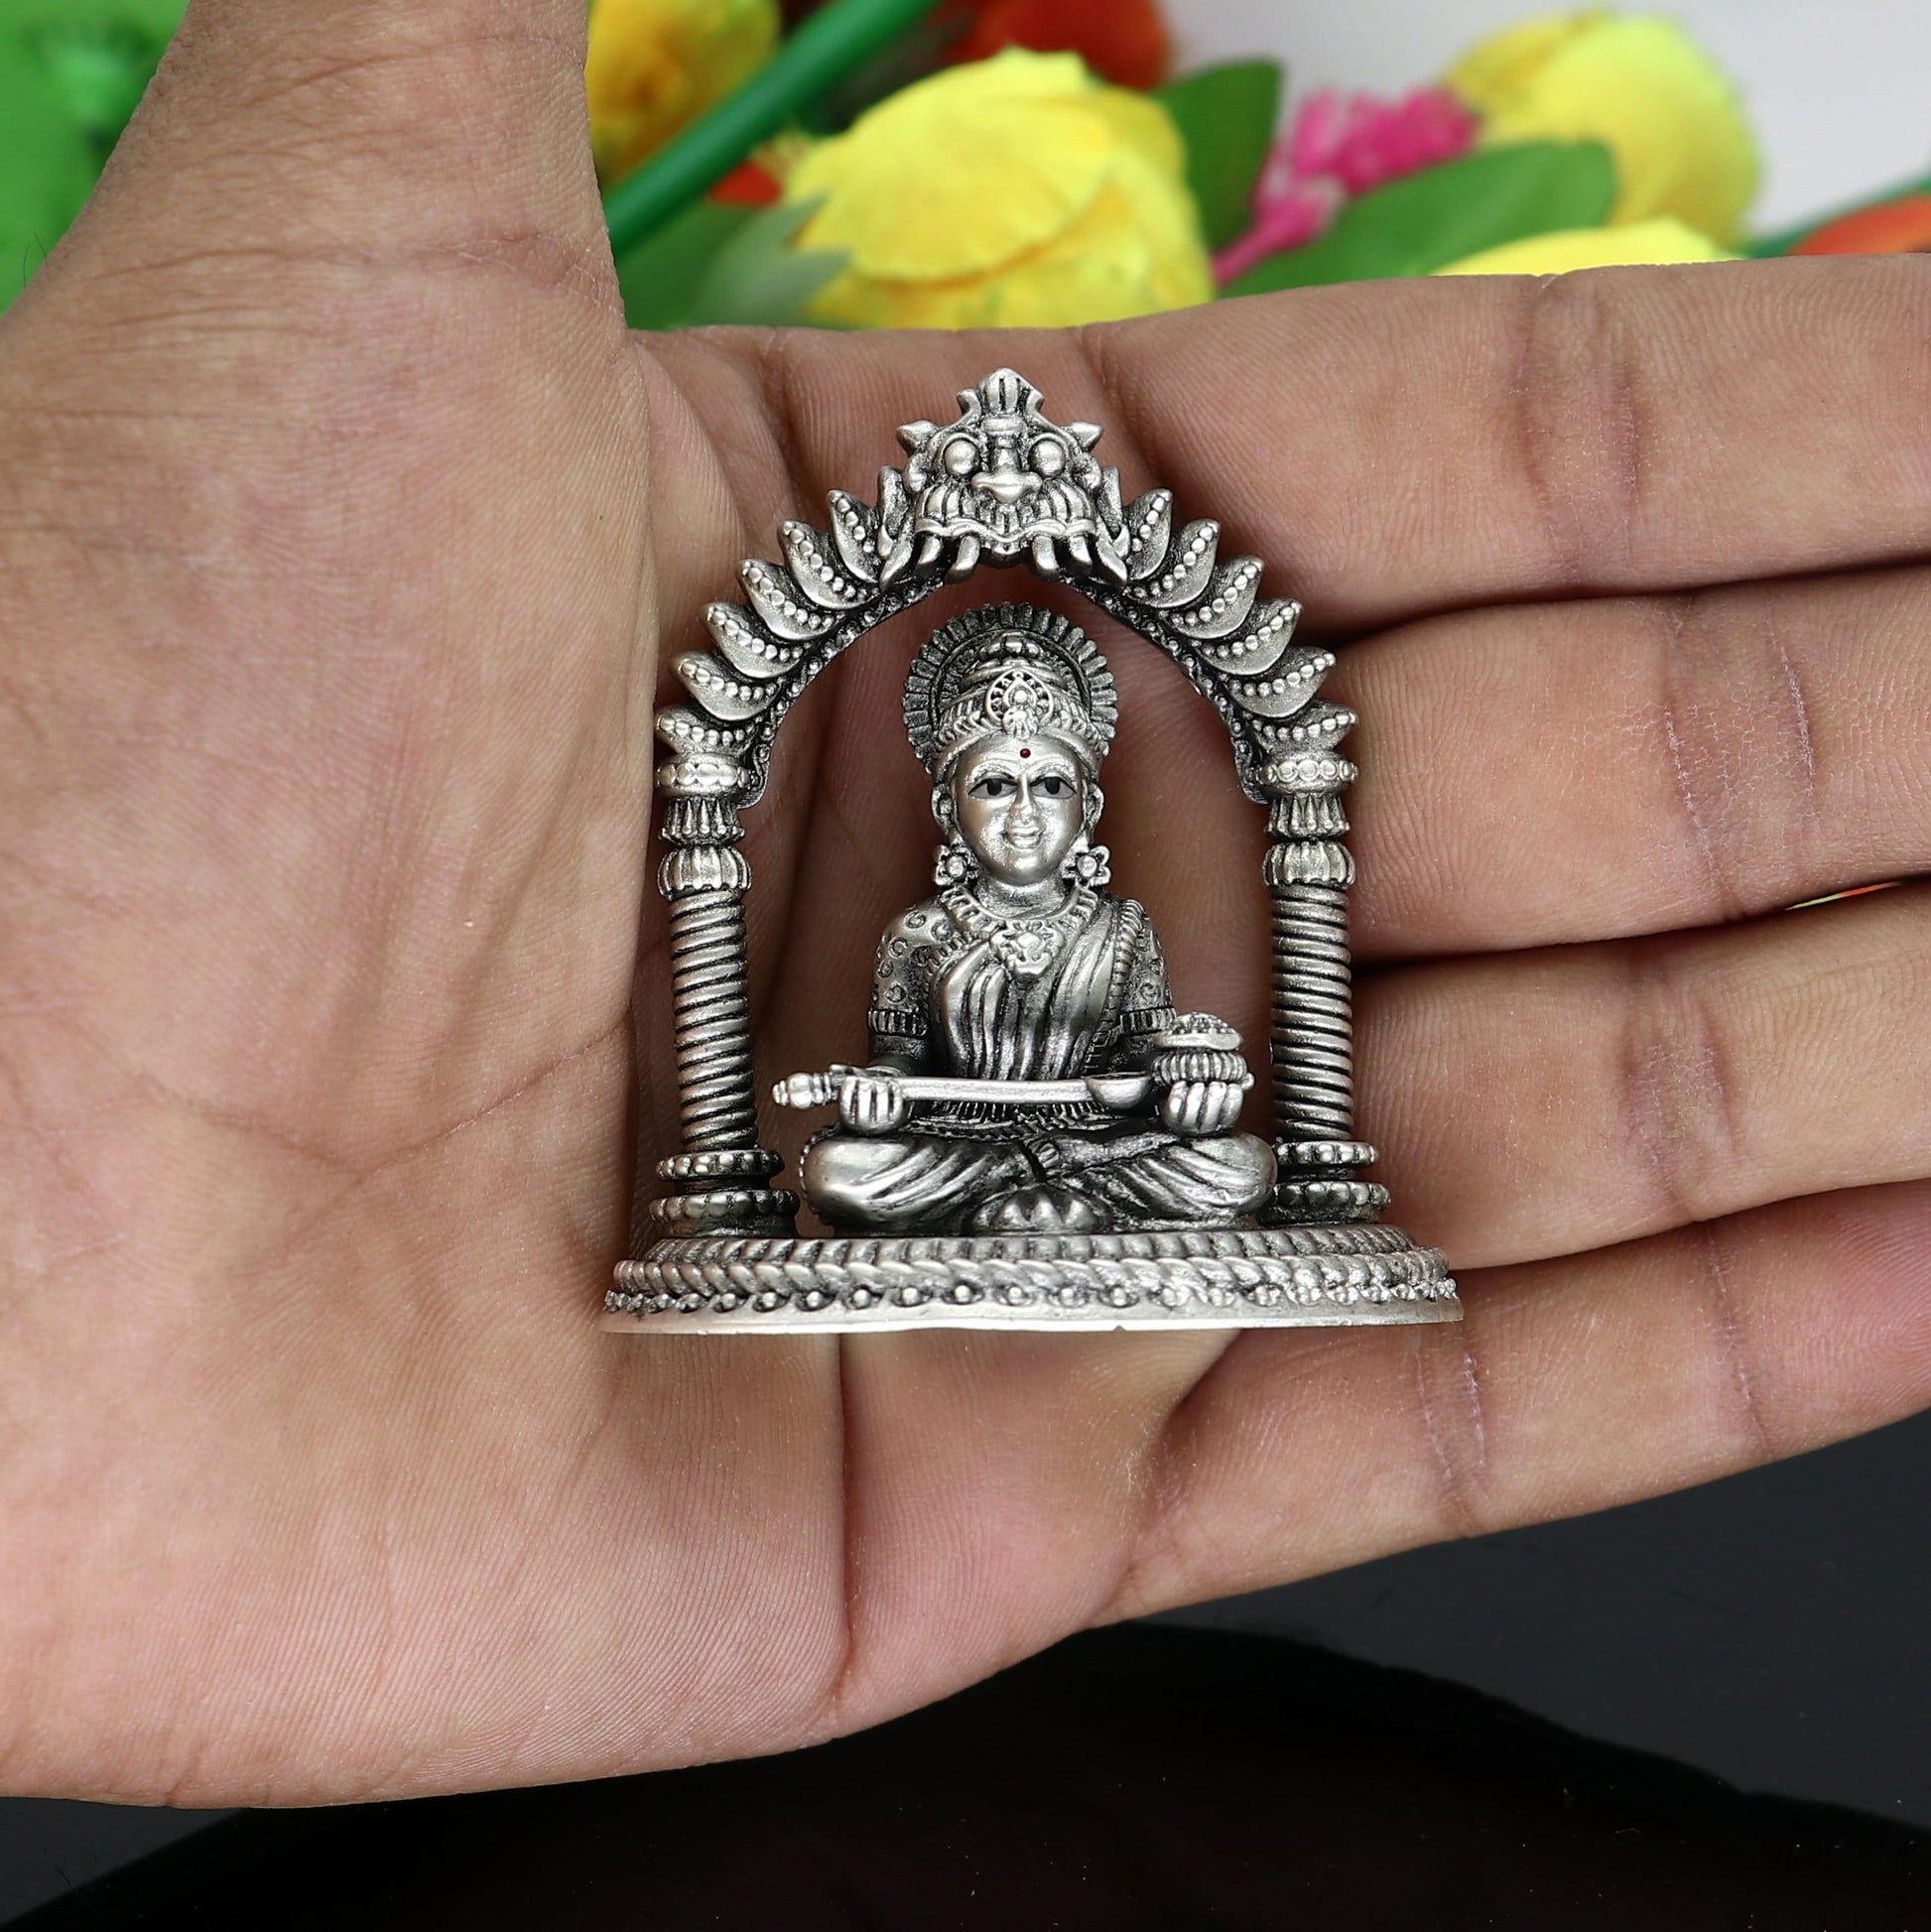 2.1" 925 sterling silver Ma Annapurna Statue Hindu goddess who is worshipped as the deity of food, nourishment, and abundance art691 - TRIBAL ORNAMENTS